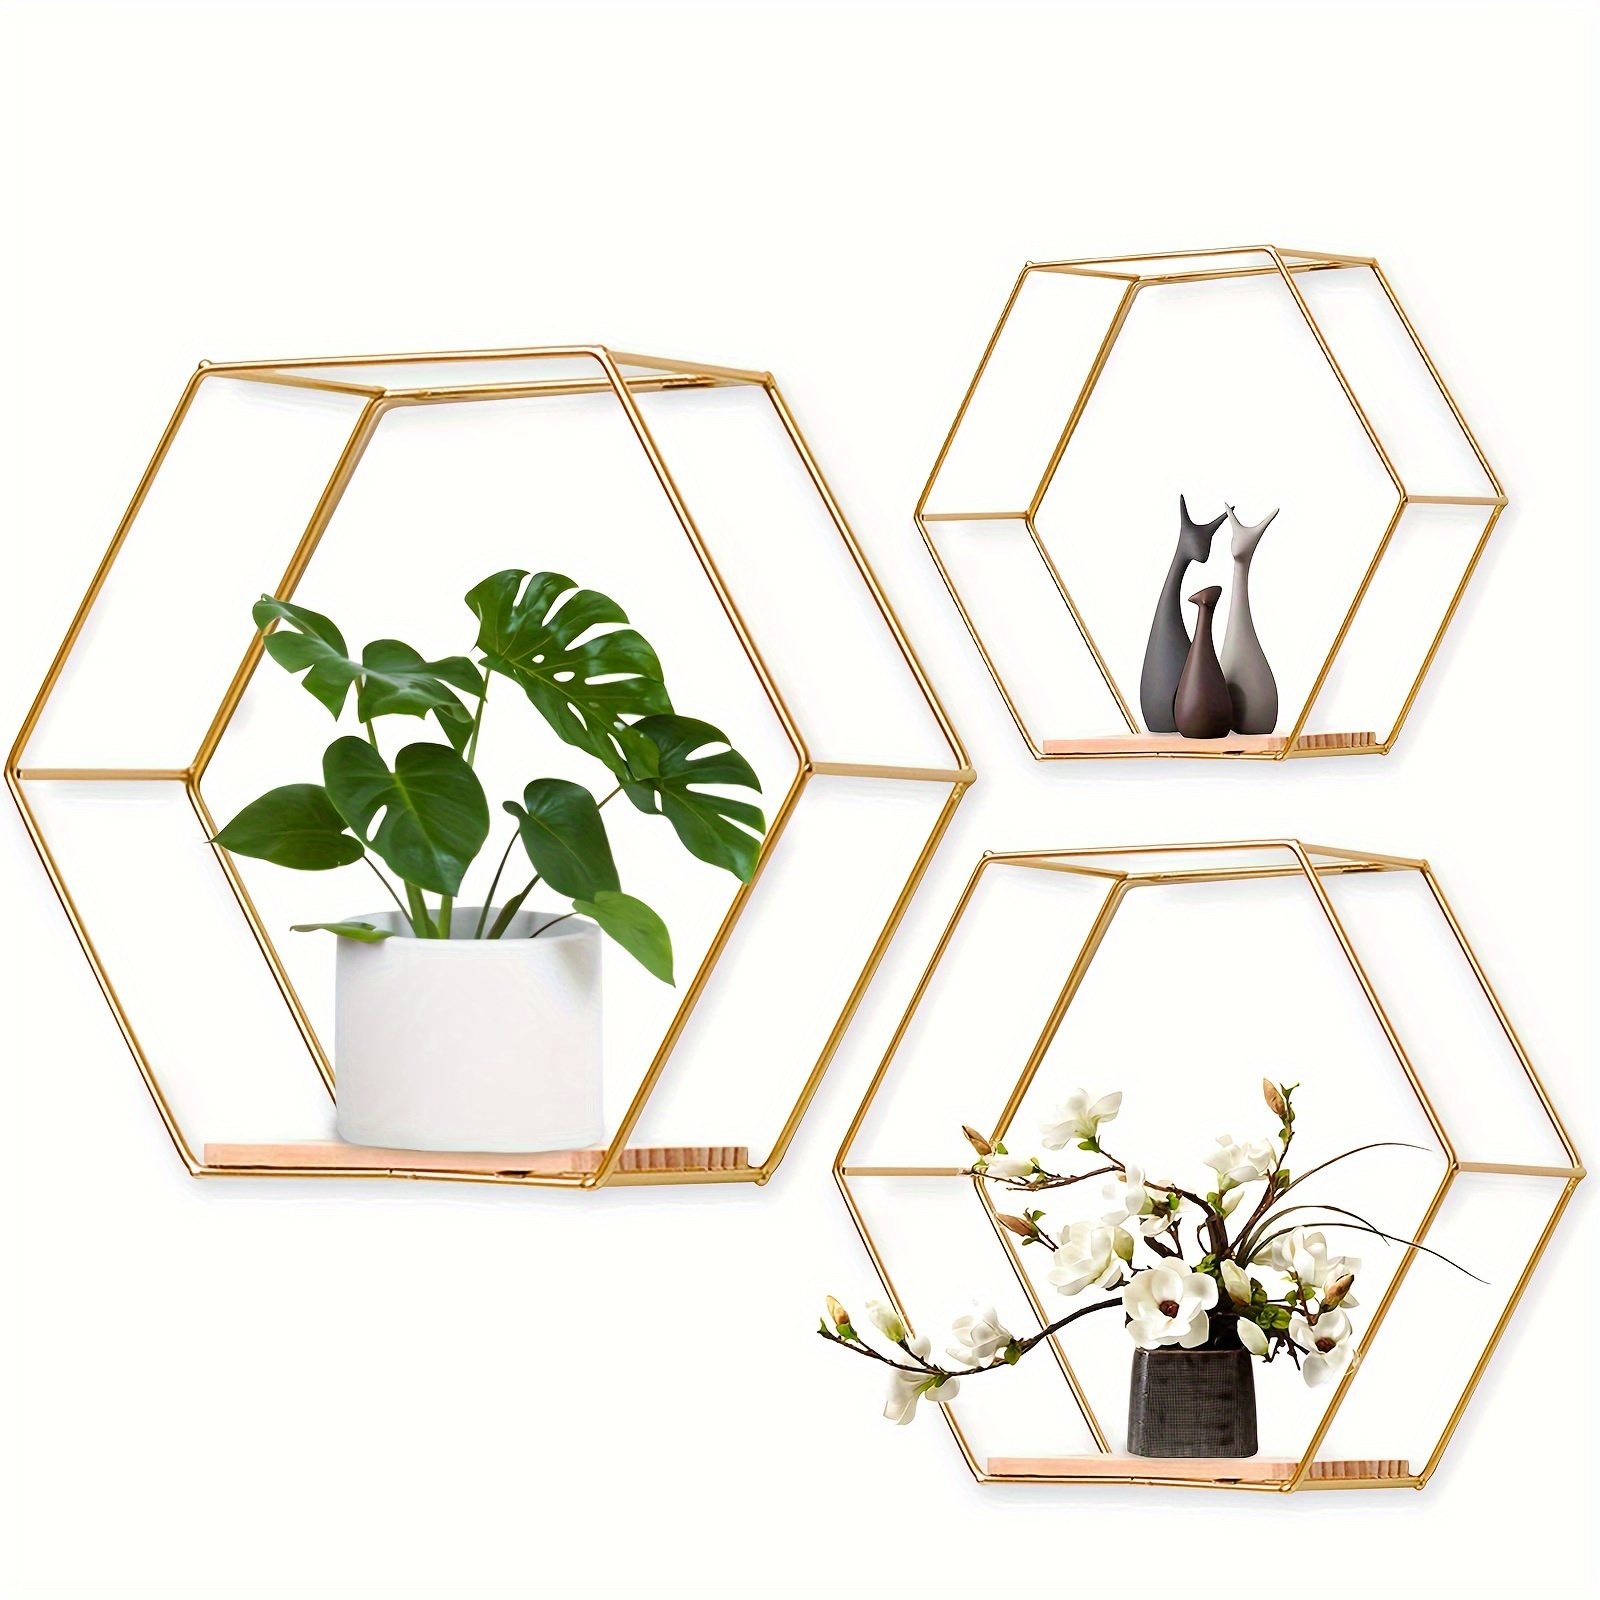 

3pcs Wall Mounted Hexagonal Floating Shelves, Modern Metal Wall Shelf, Simple Wood Partition Storage Shelves, Wall Decor Rack For Bedroom, Living Room, Kitchen And Office, Home Room Decor